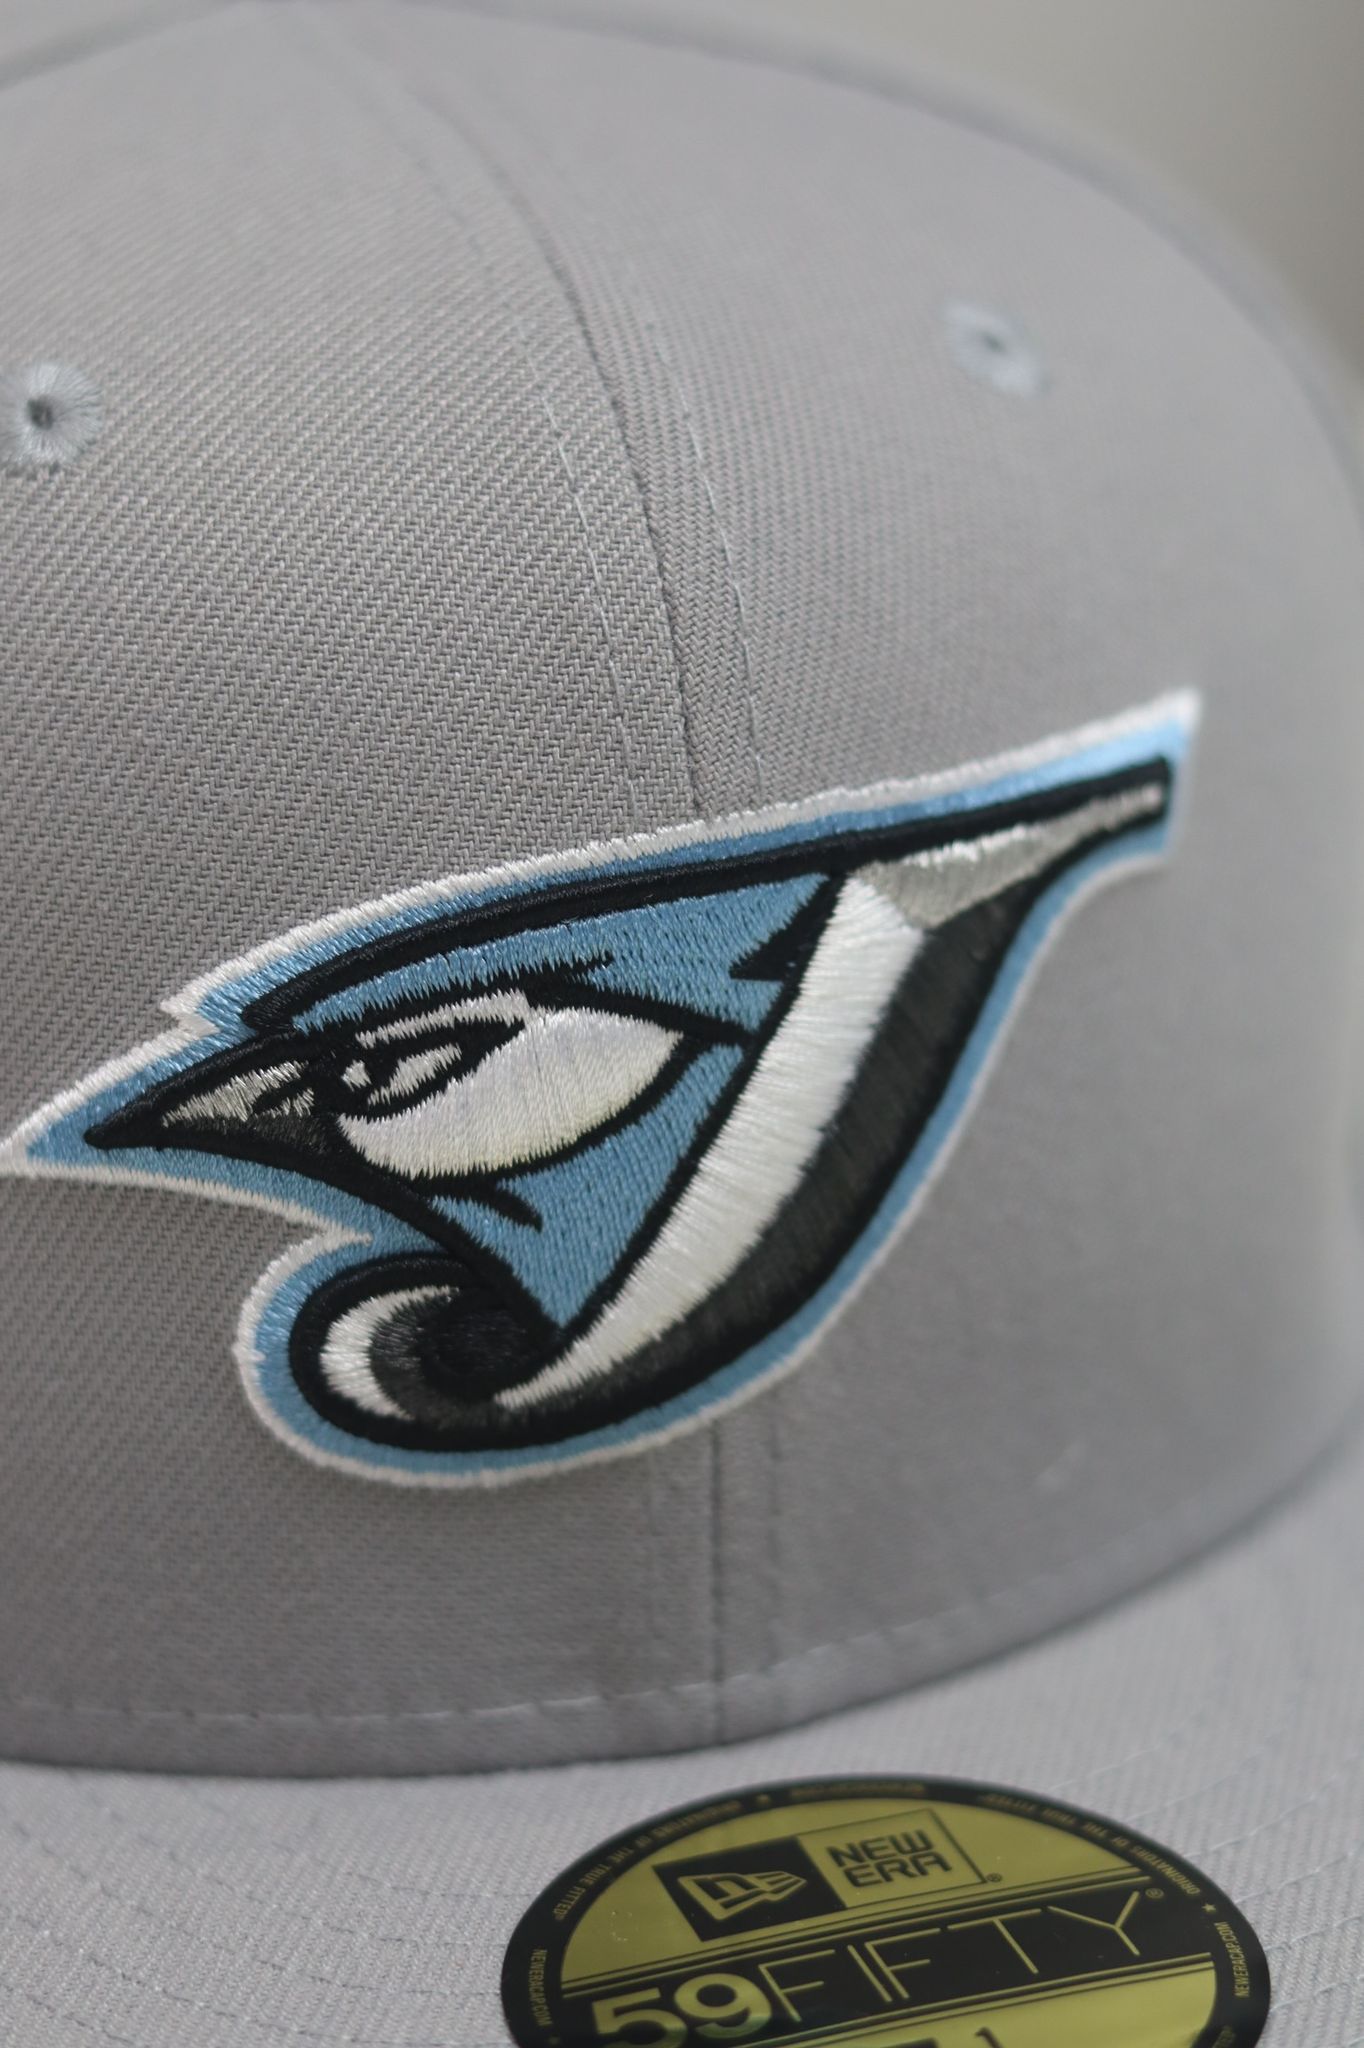 Grey Toronto Blue Jays Exclusive 59FIFTY Hat Icy Undervisor ❄️